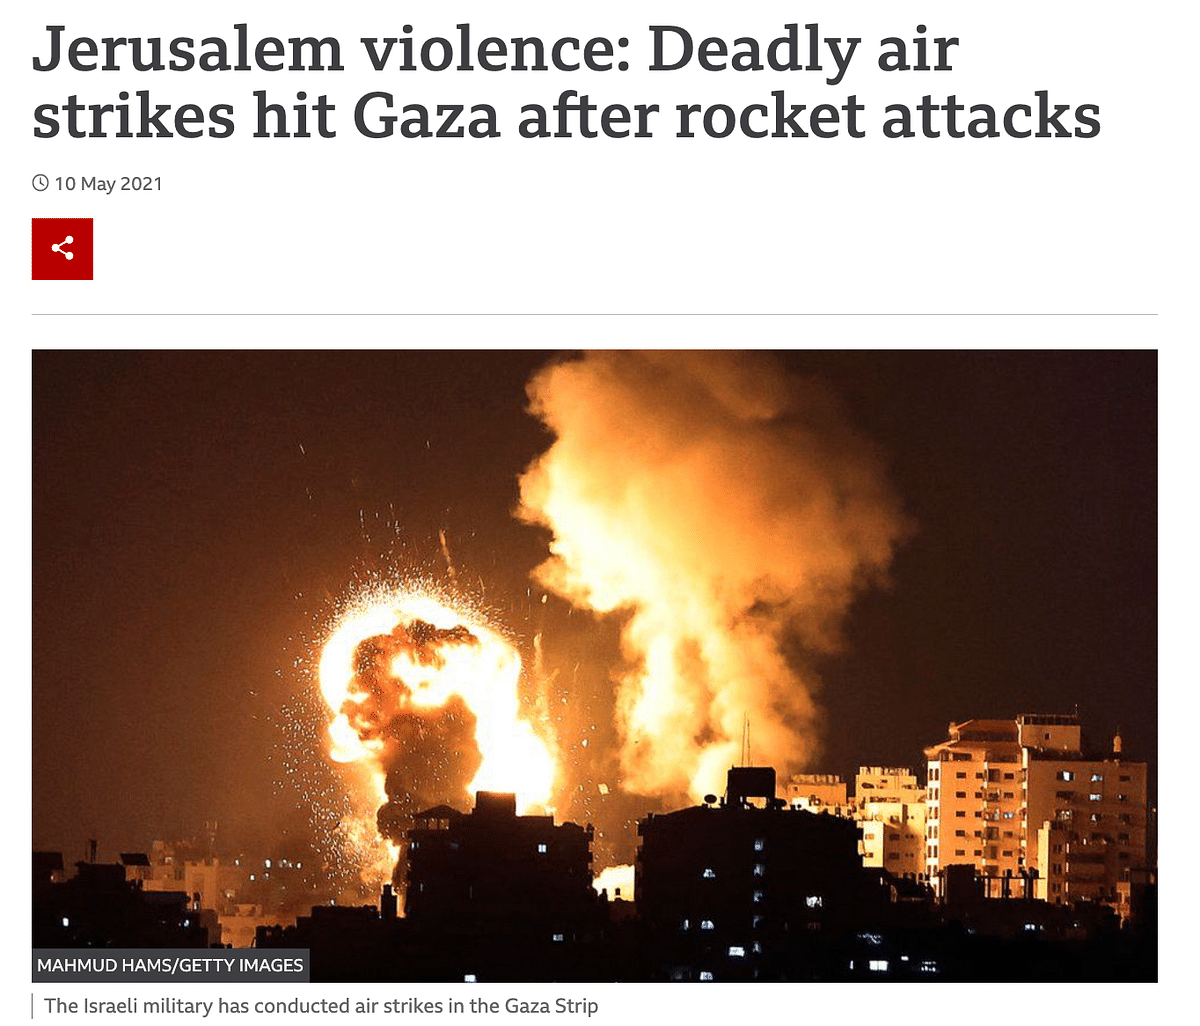 The image is from May 2021 when the Israeli military had conducted airstrikes in the Gaza Strip. 